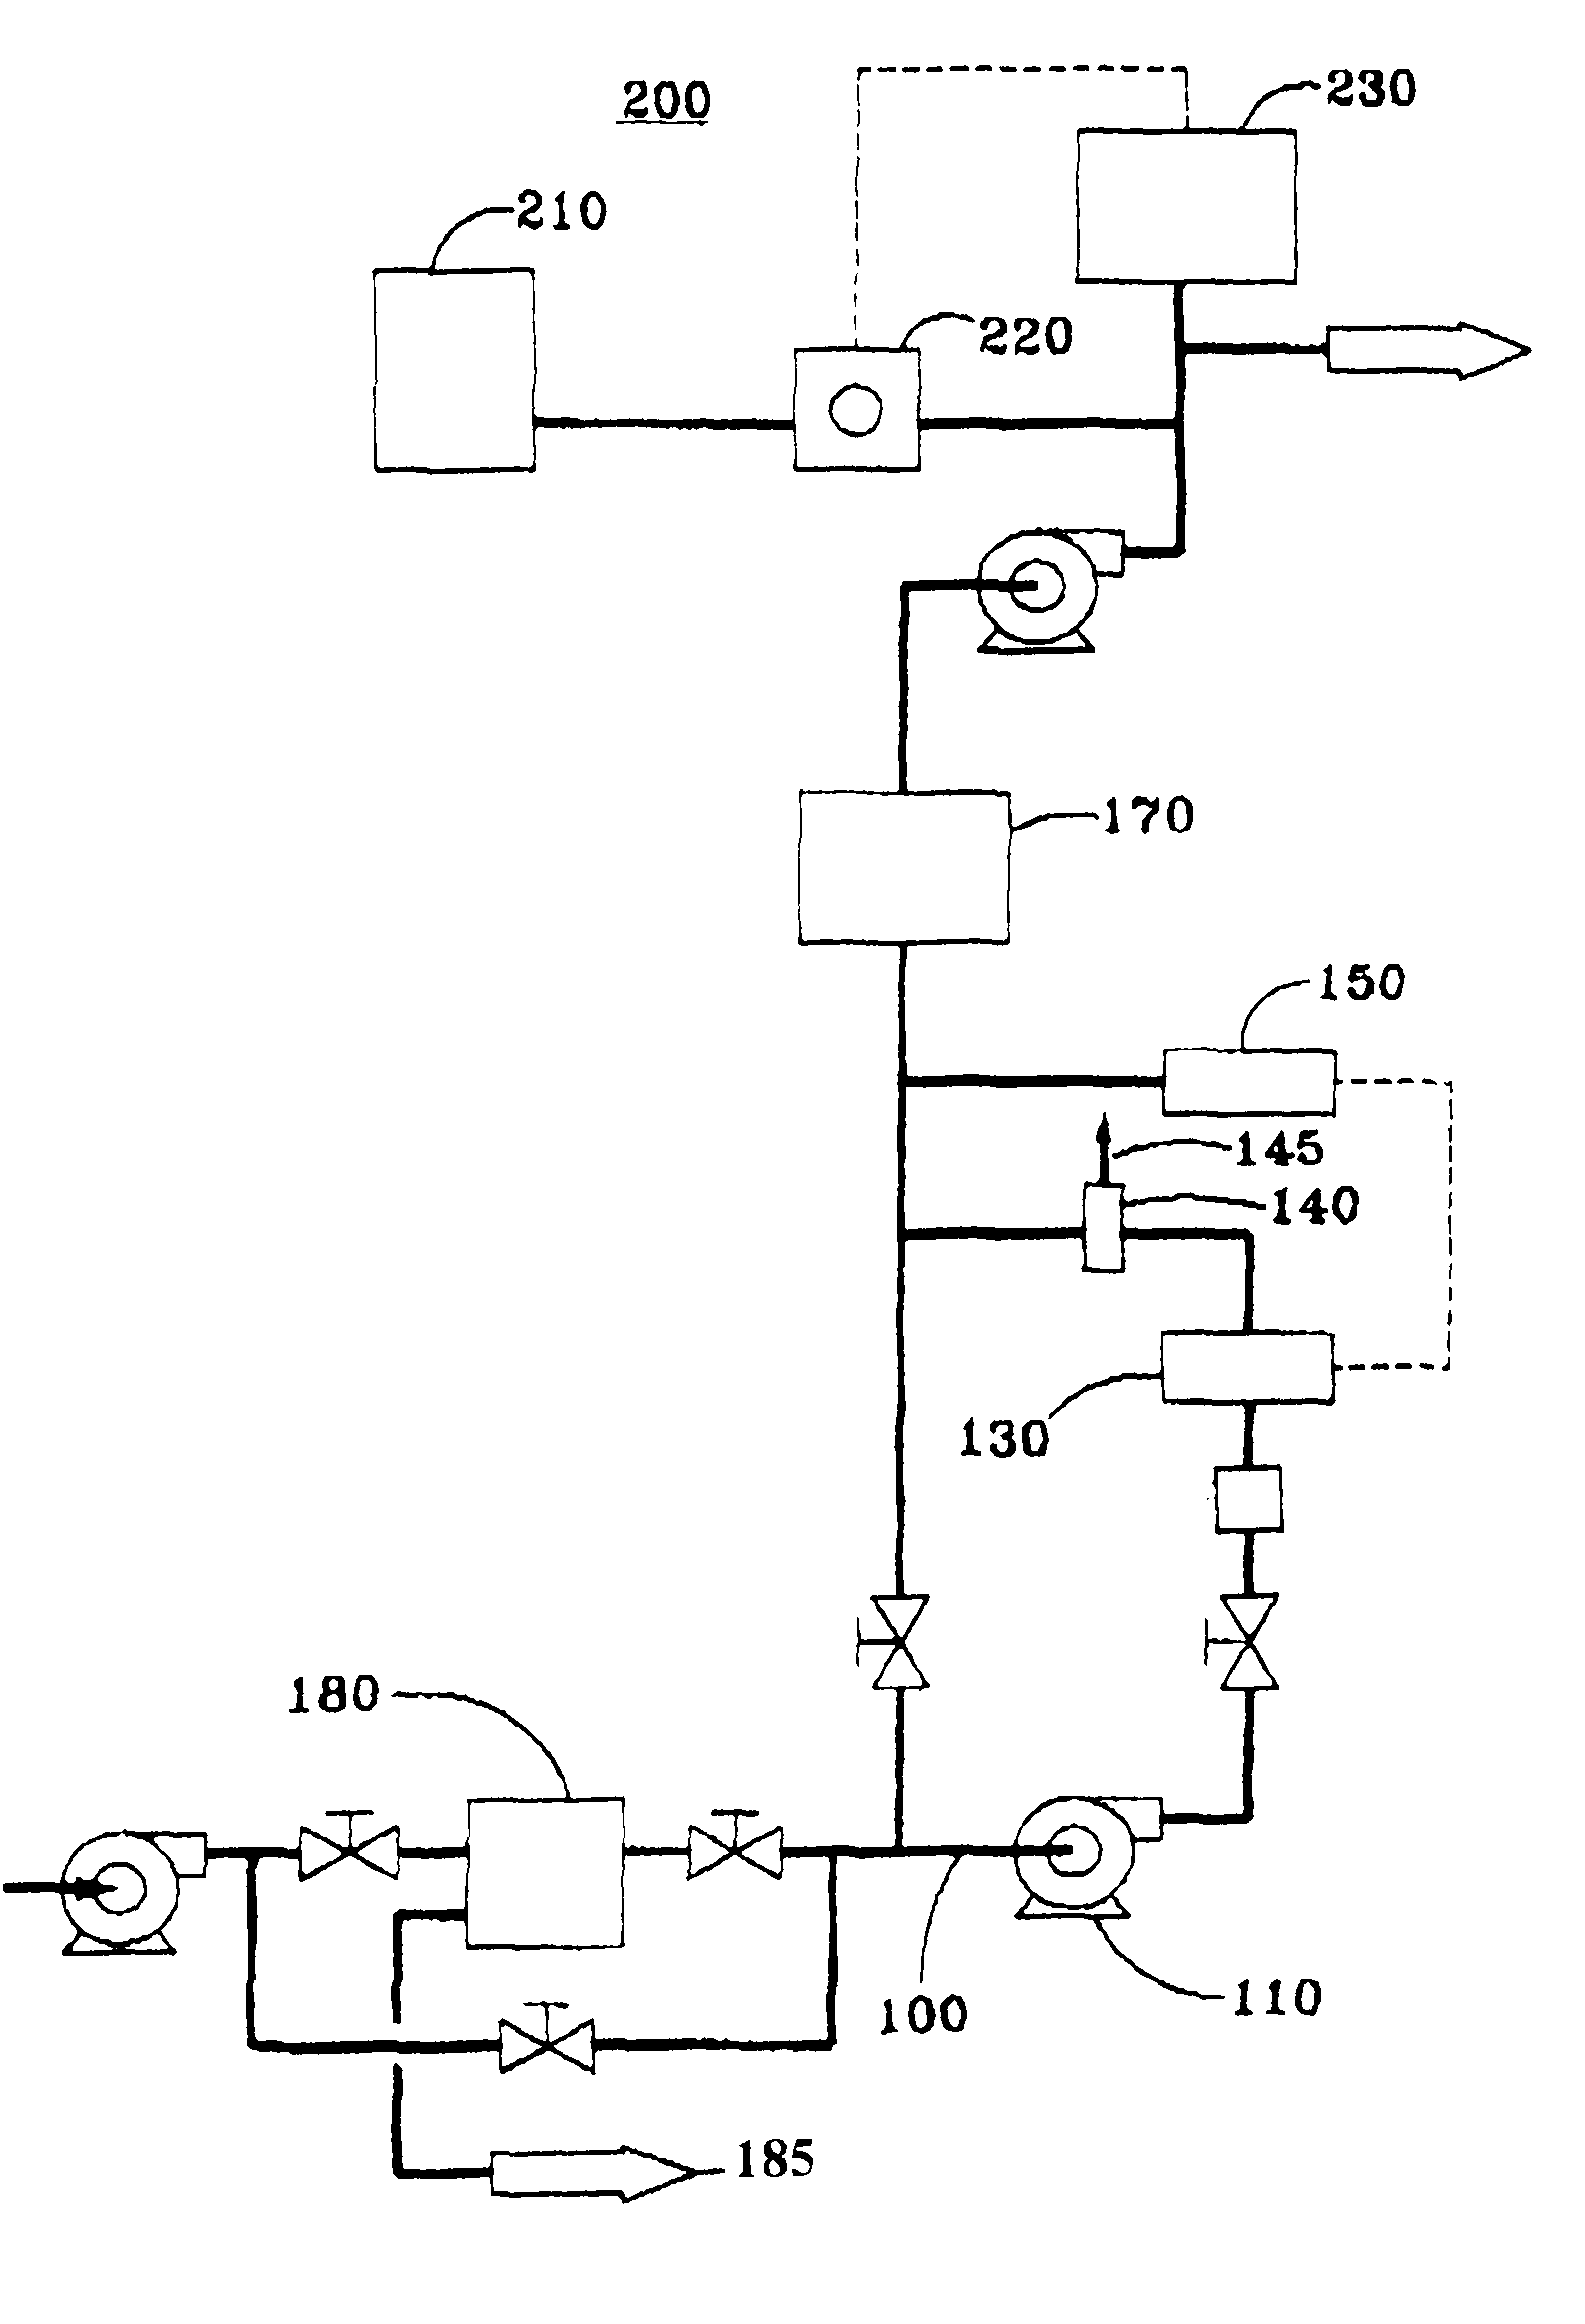 System and process for treatment and de-halogenation of ballast water